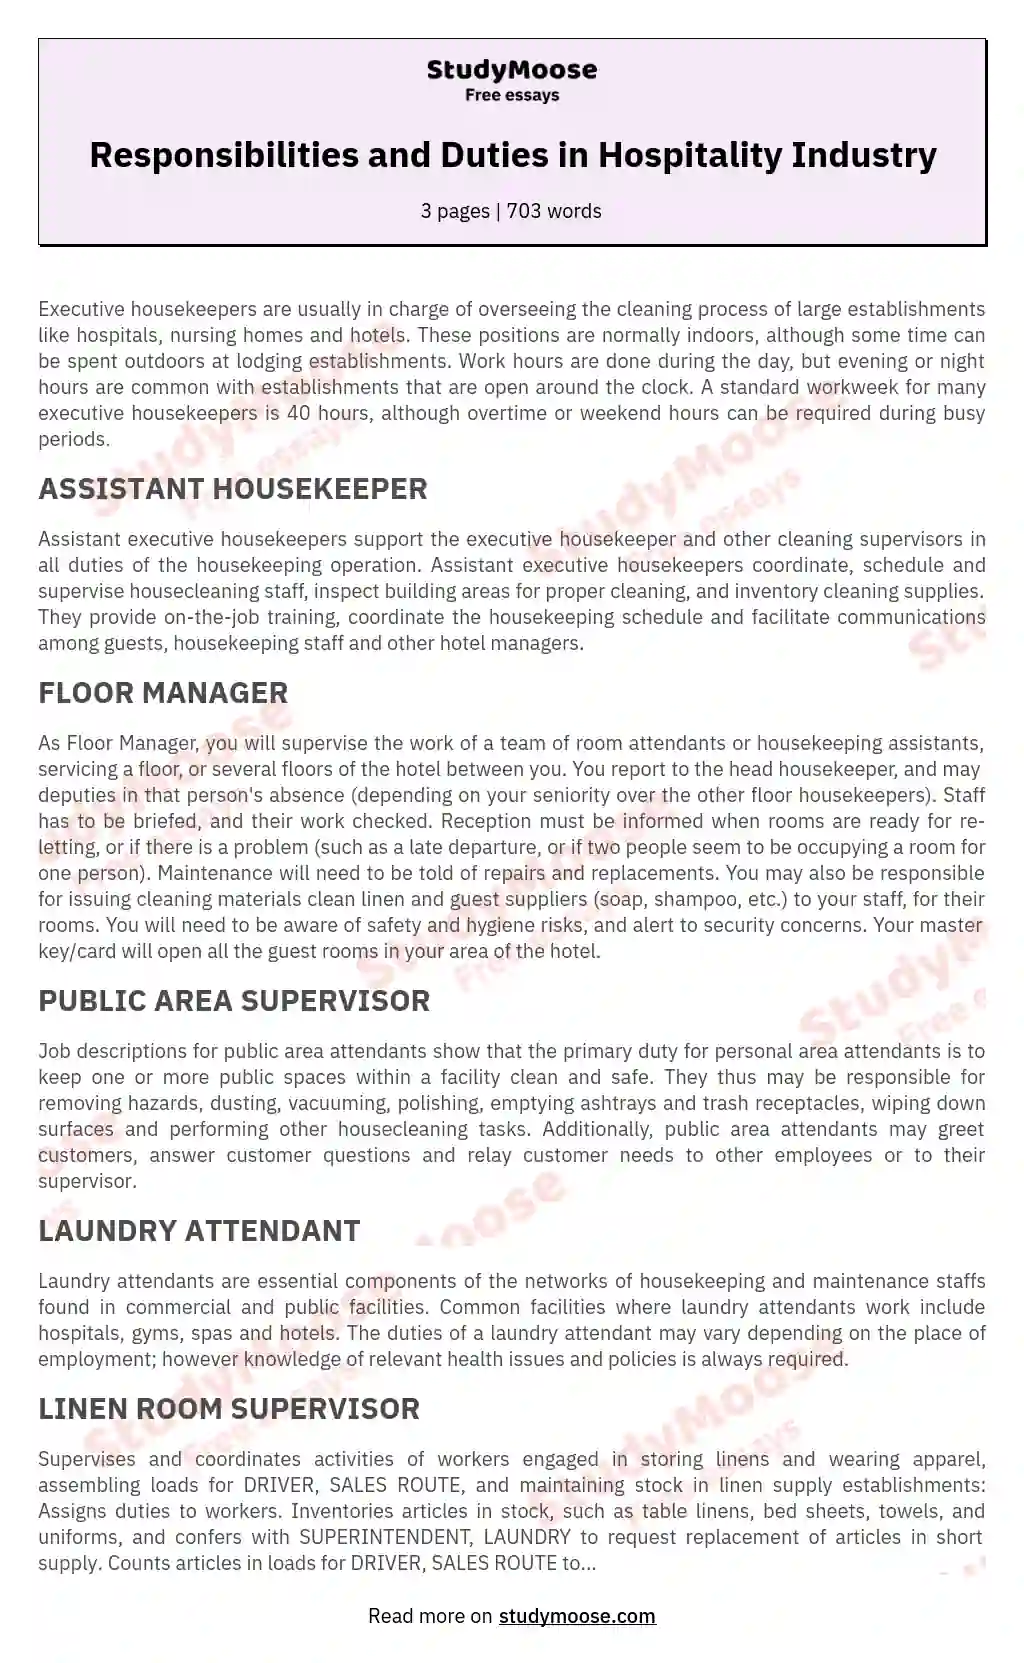 Responsibilities and Duties in Hospitality Industry